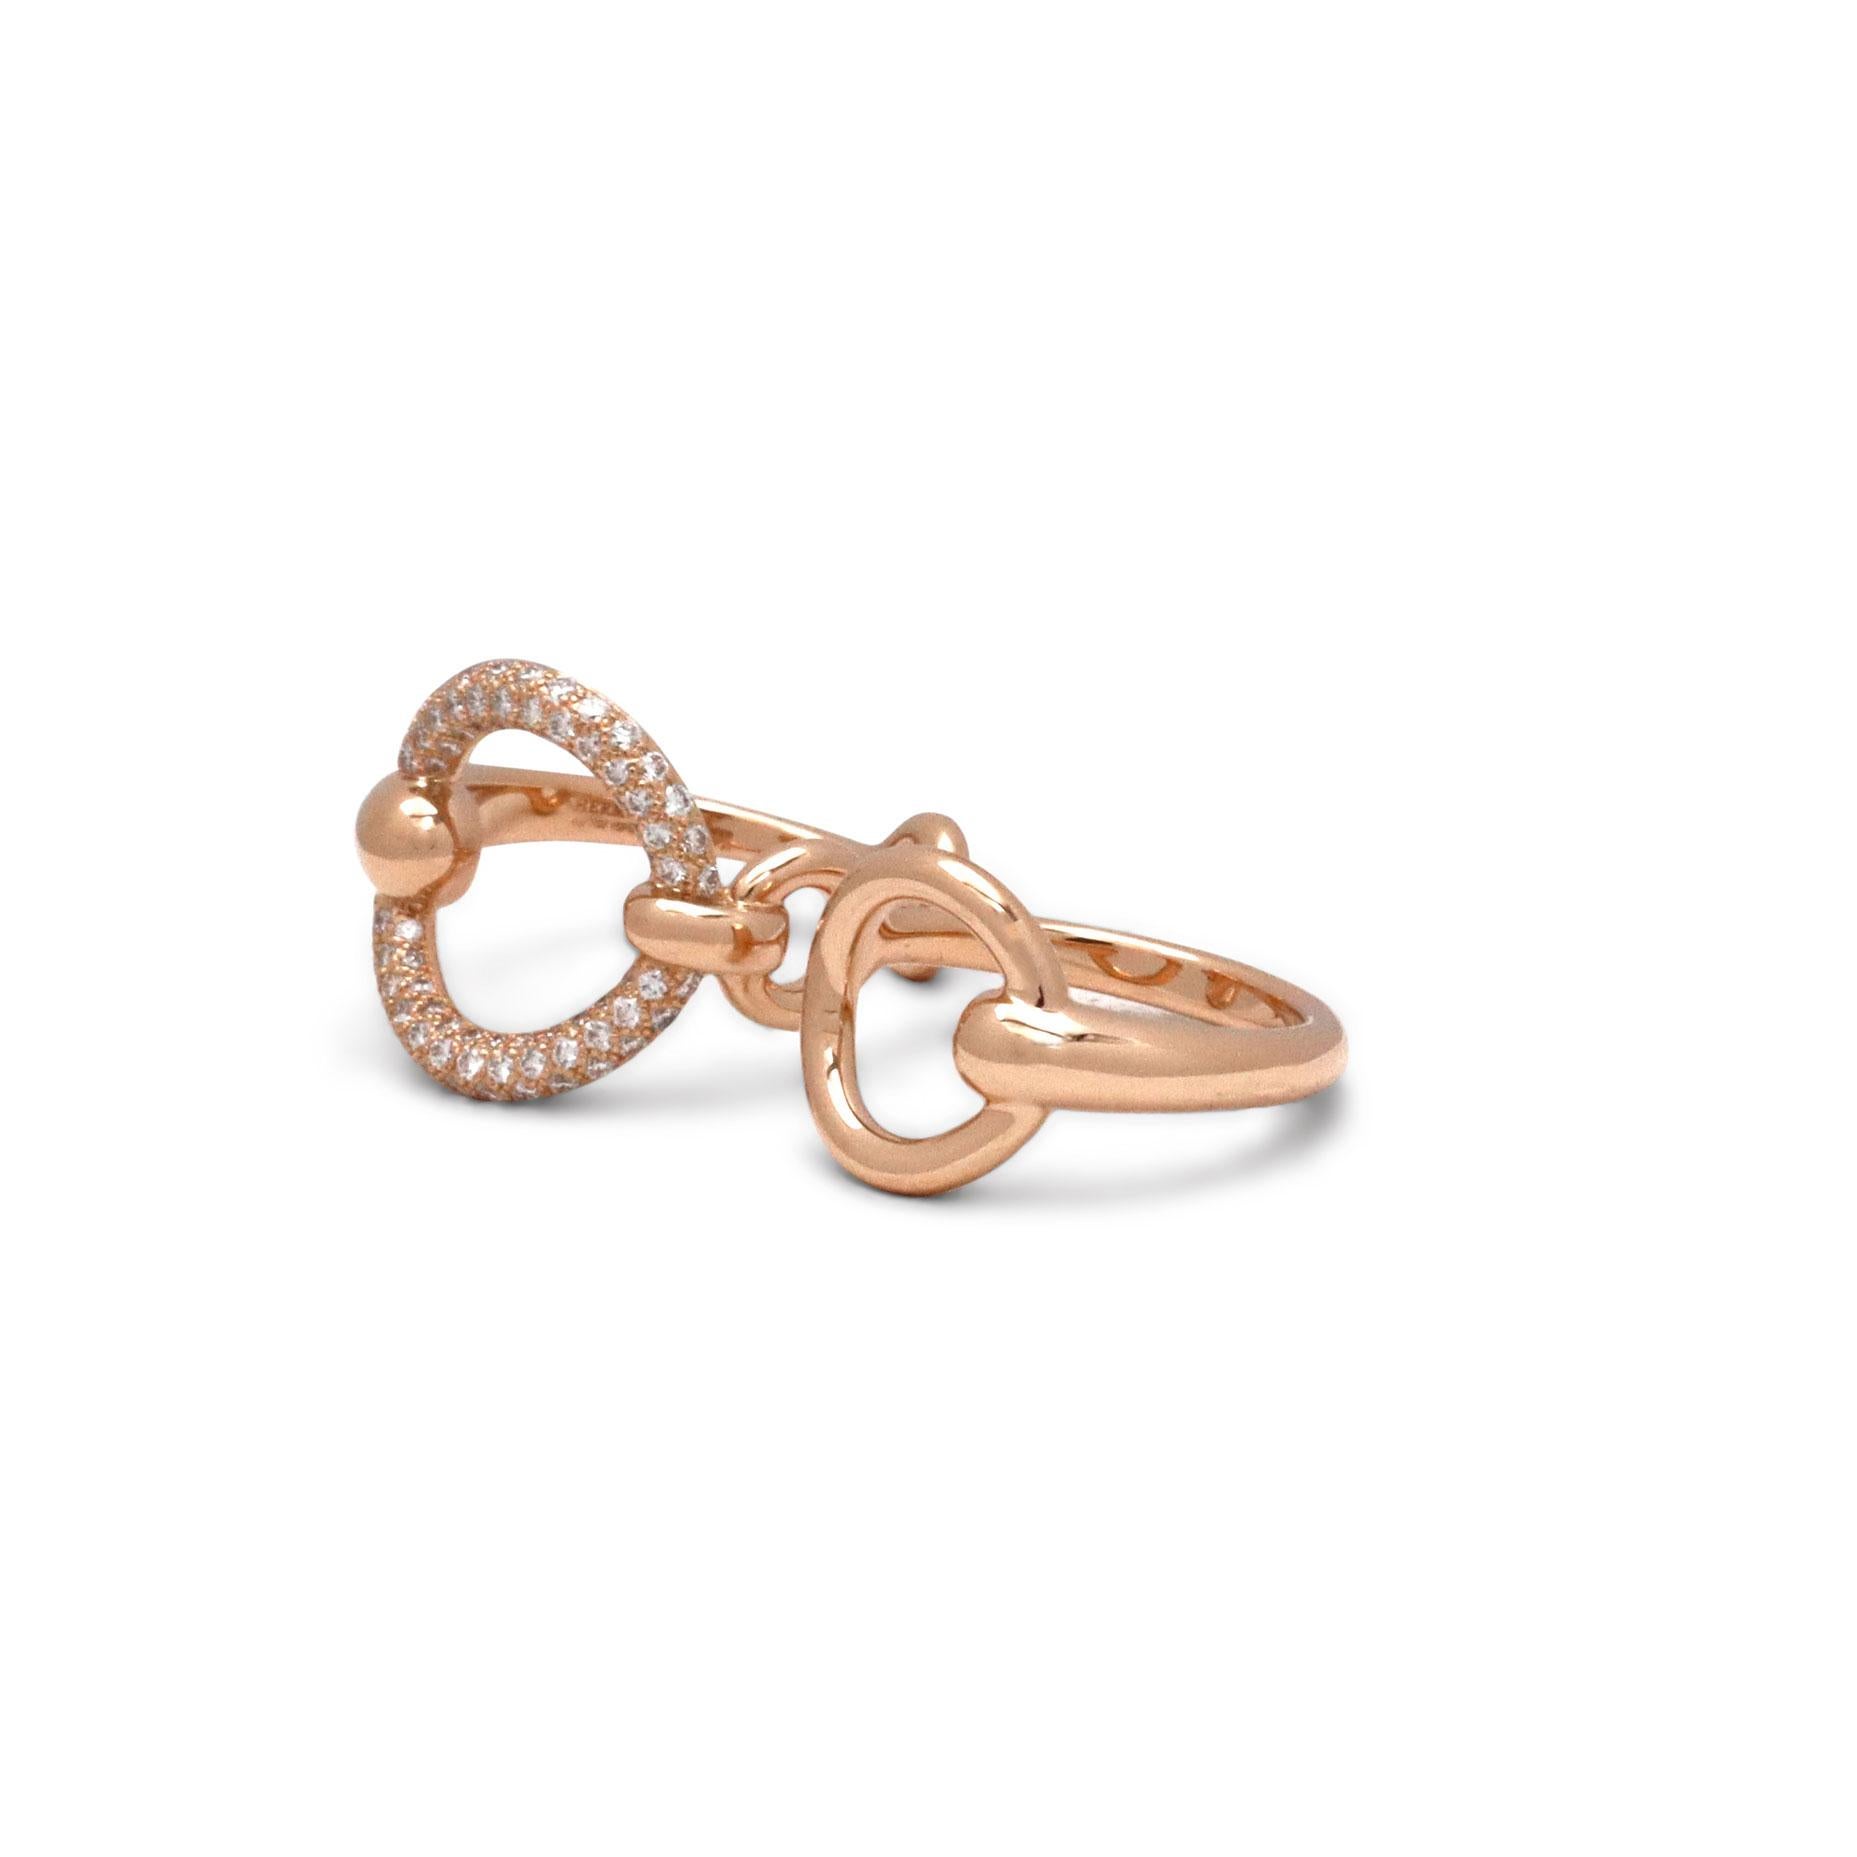 Authentic Hermes Filet d'Or ring crafted in 18 karat rose gold features a double ring design. One of the rings are set with round diamonds carrying an estimated total carat weight of 0.43. Signed Hermes, Au750, Made in France, with serial number and